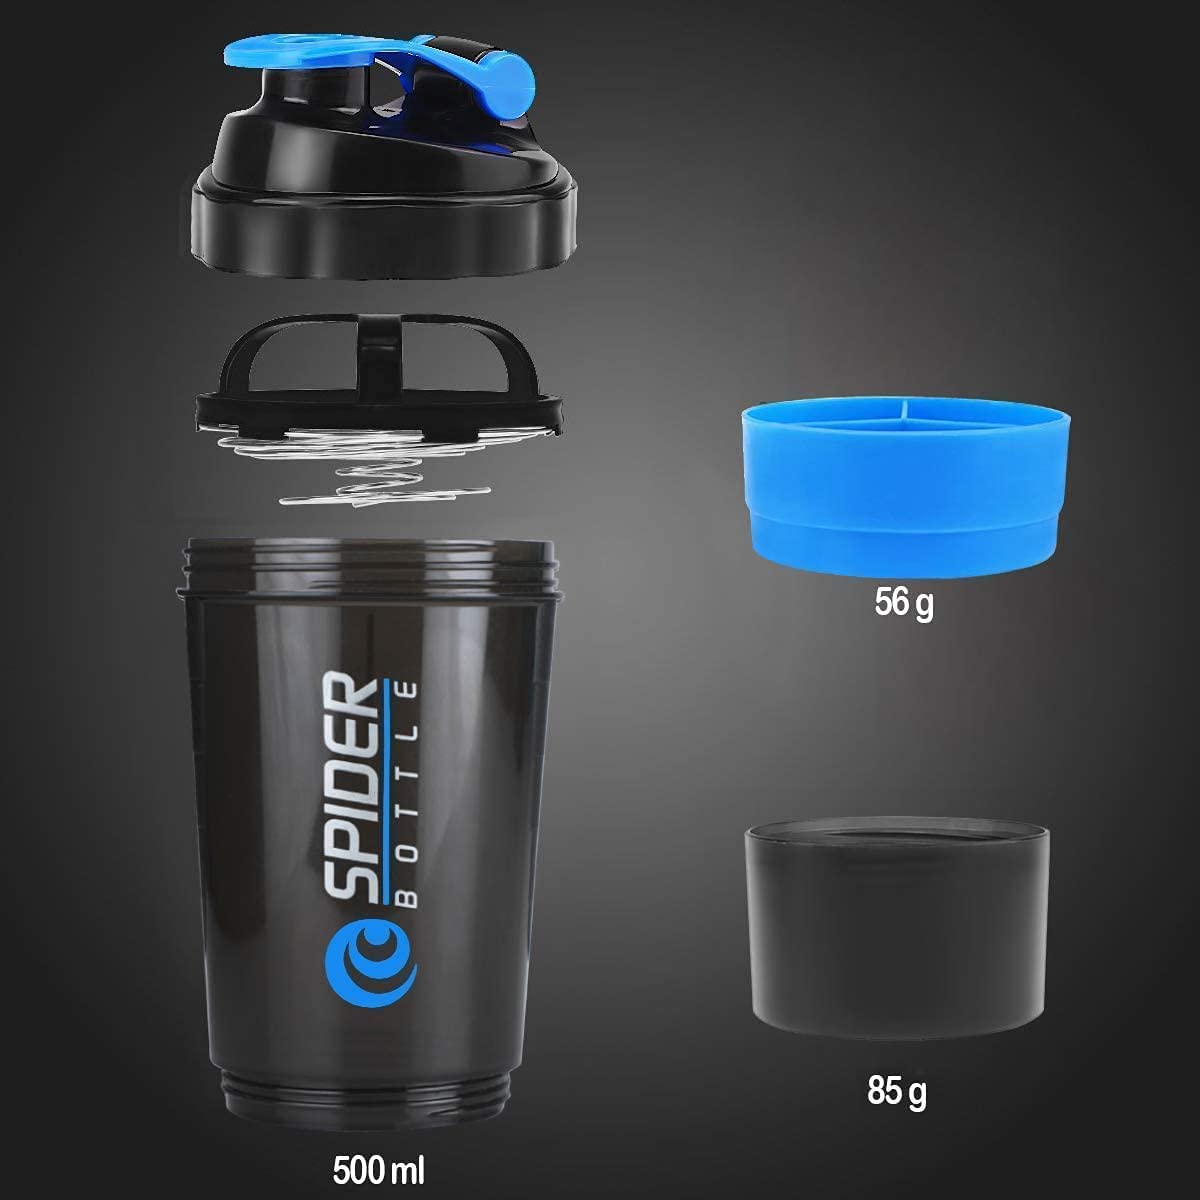 Spider Protein Shaker | Gym Shaker 500ml with 2 Storage Extra Compartment  Blue